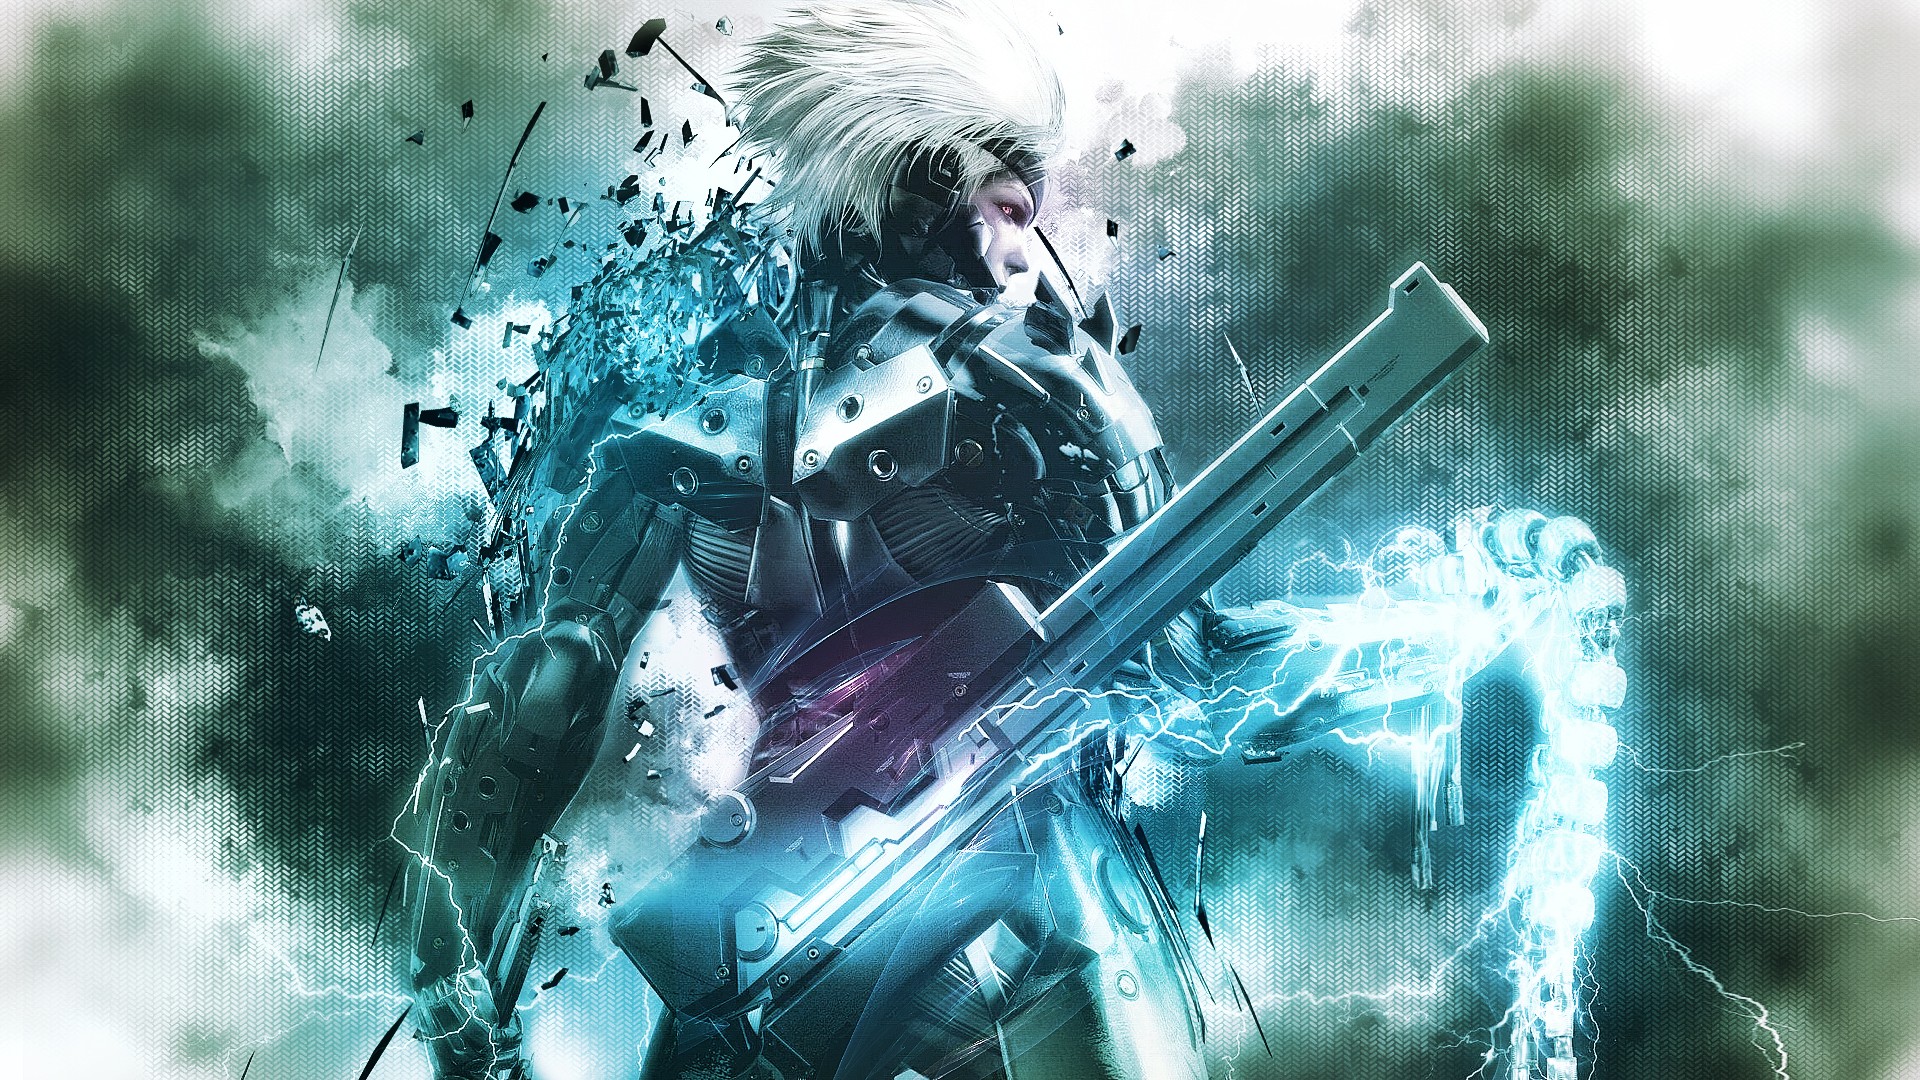 Note All Metal Gear Rising HD Wallpaper Are Presented In